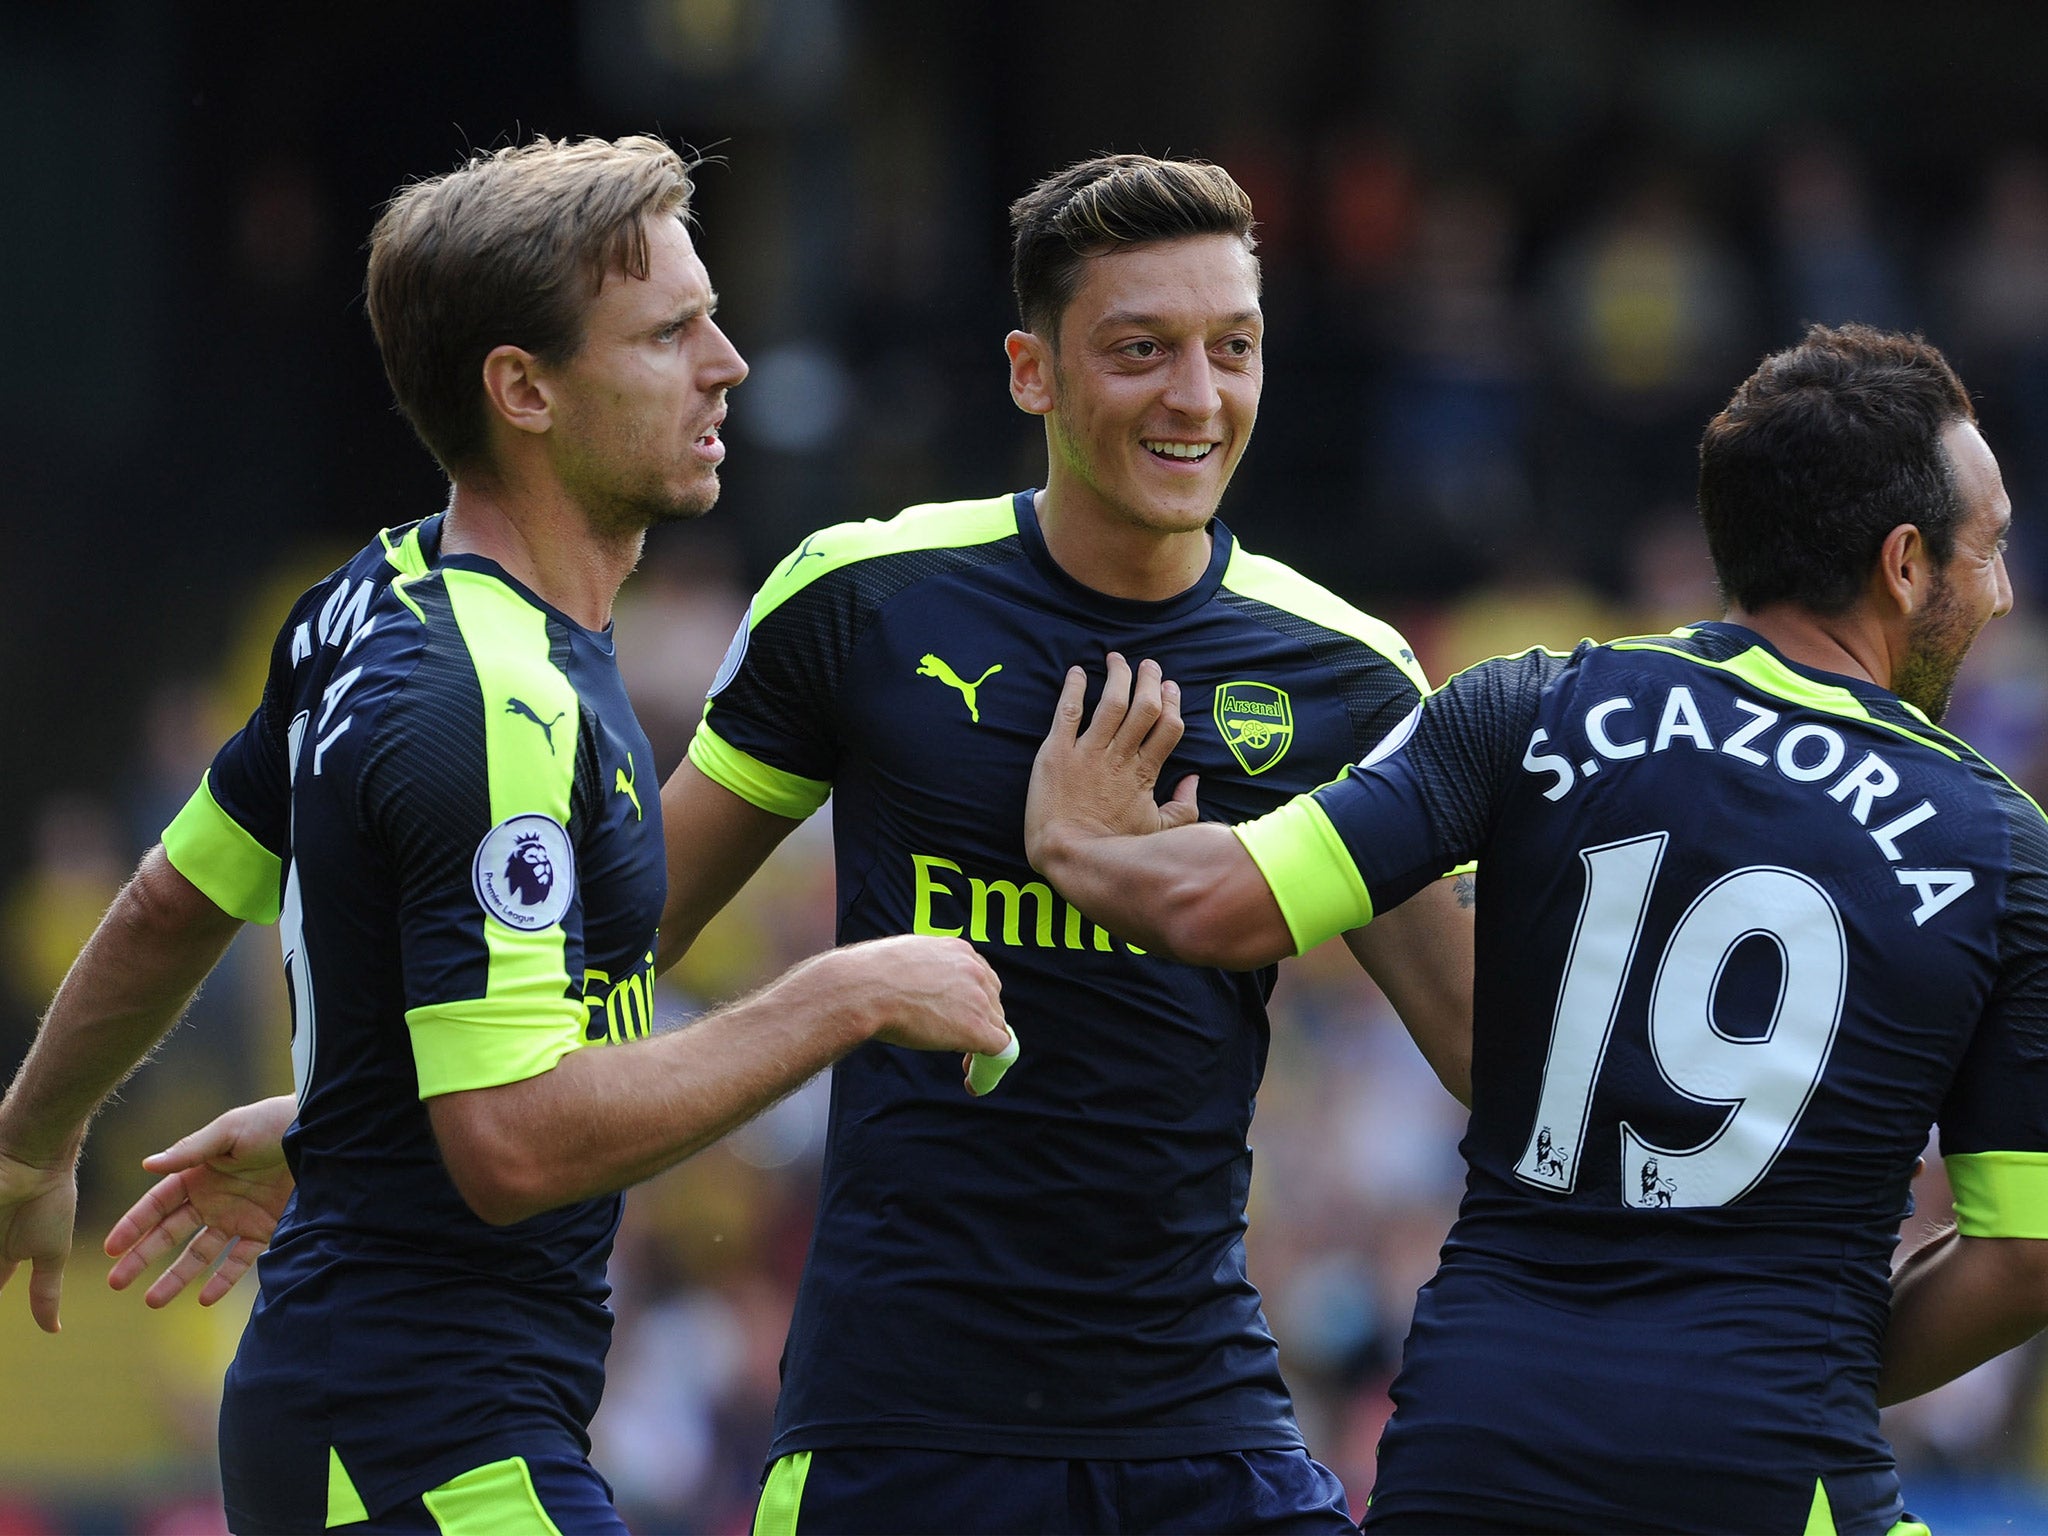 Arsenal want Mesut Ozil to sign a new contract with the club